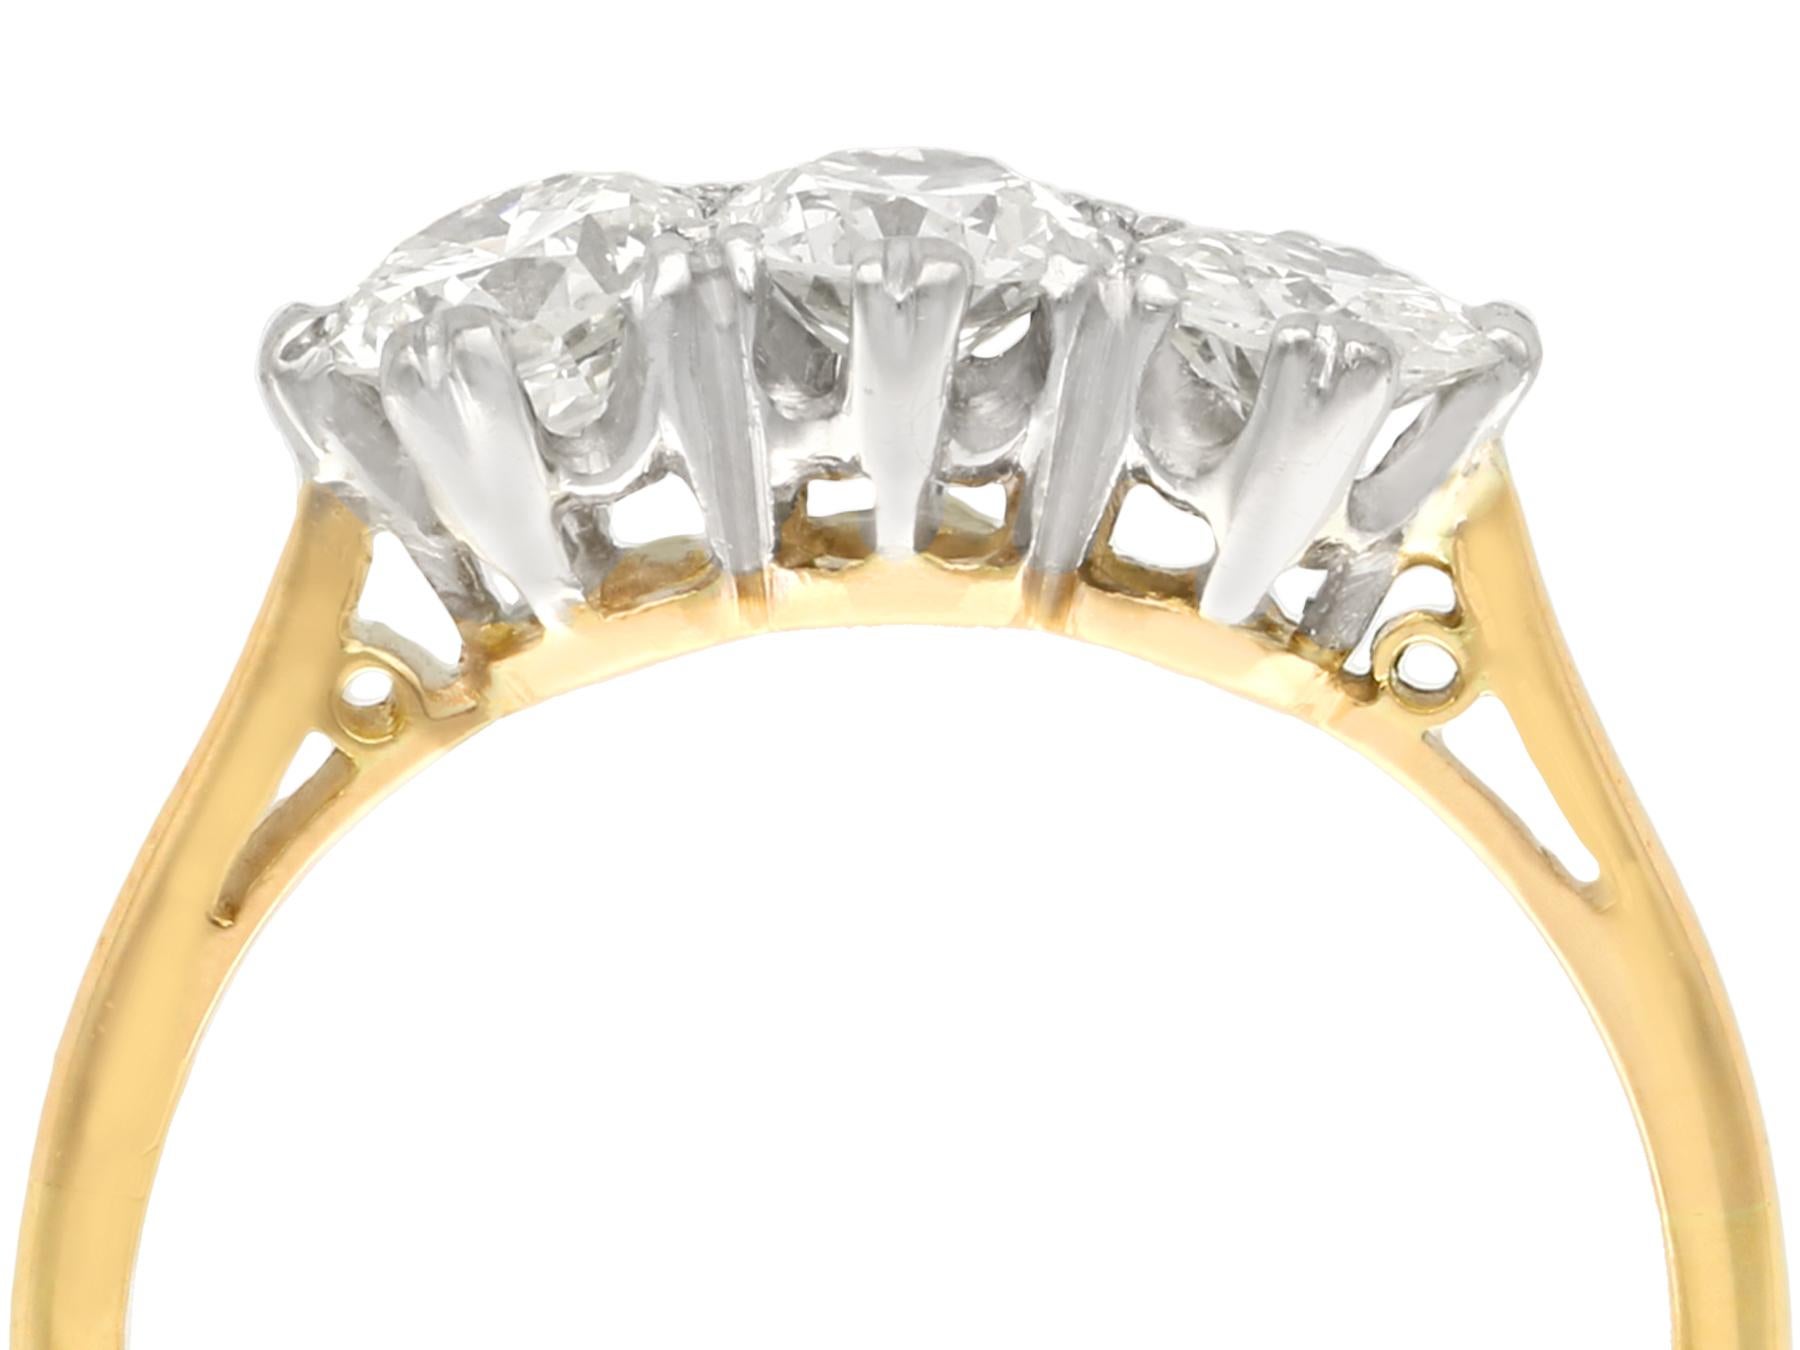 An impressive vintage 0.93 carat diamond and 18 karat yellow gold, 18 karat white gold set trilogy ring; part of our diverse antique jewelry and estate jewelry collections.

This fine and impressive gold diamond trilogy ring has been crafted in 18k